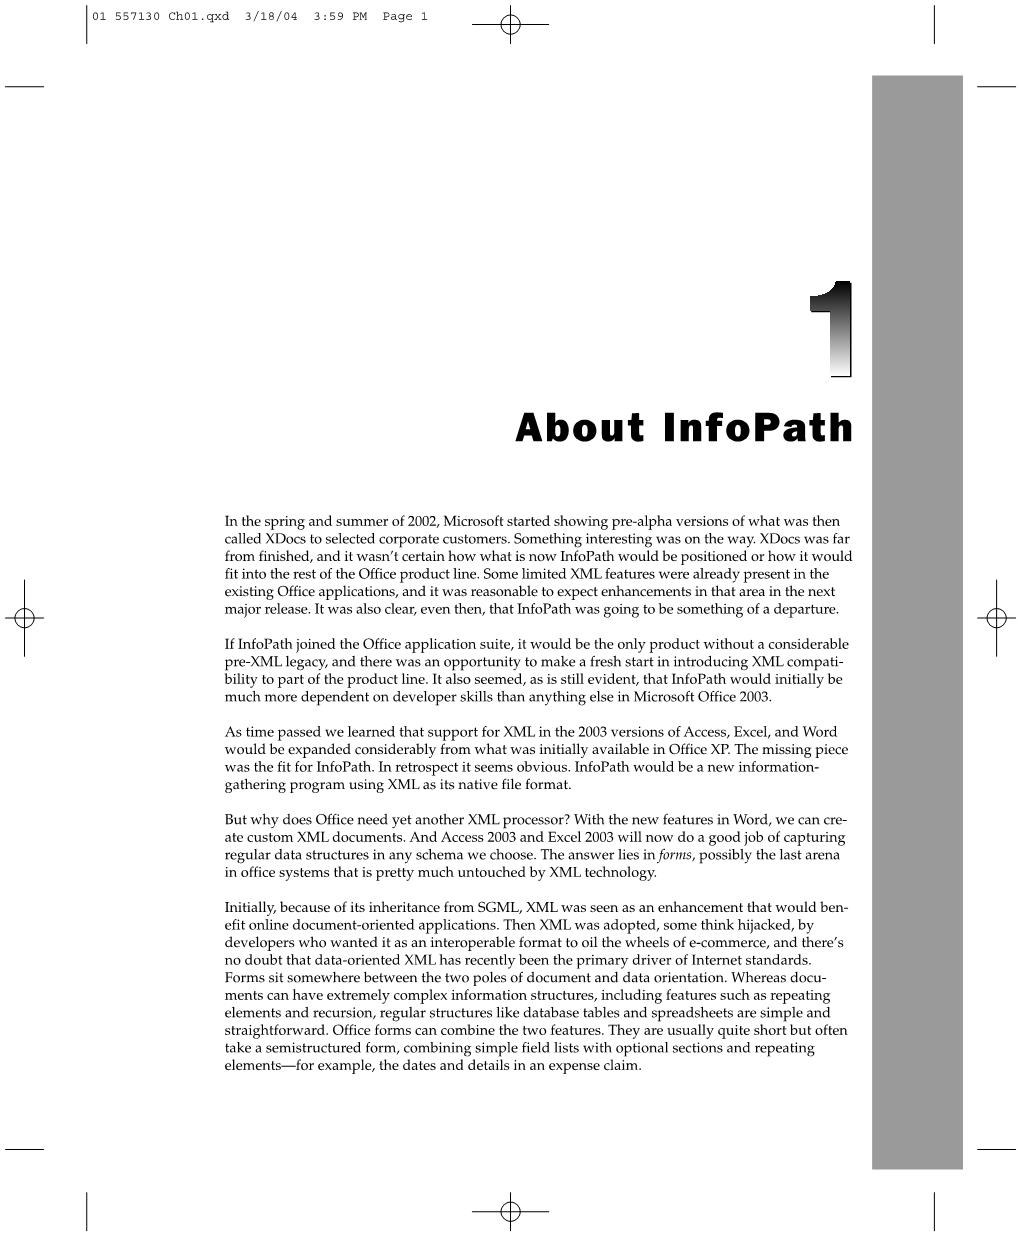 About Infopath